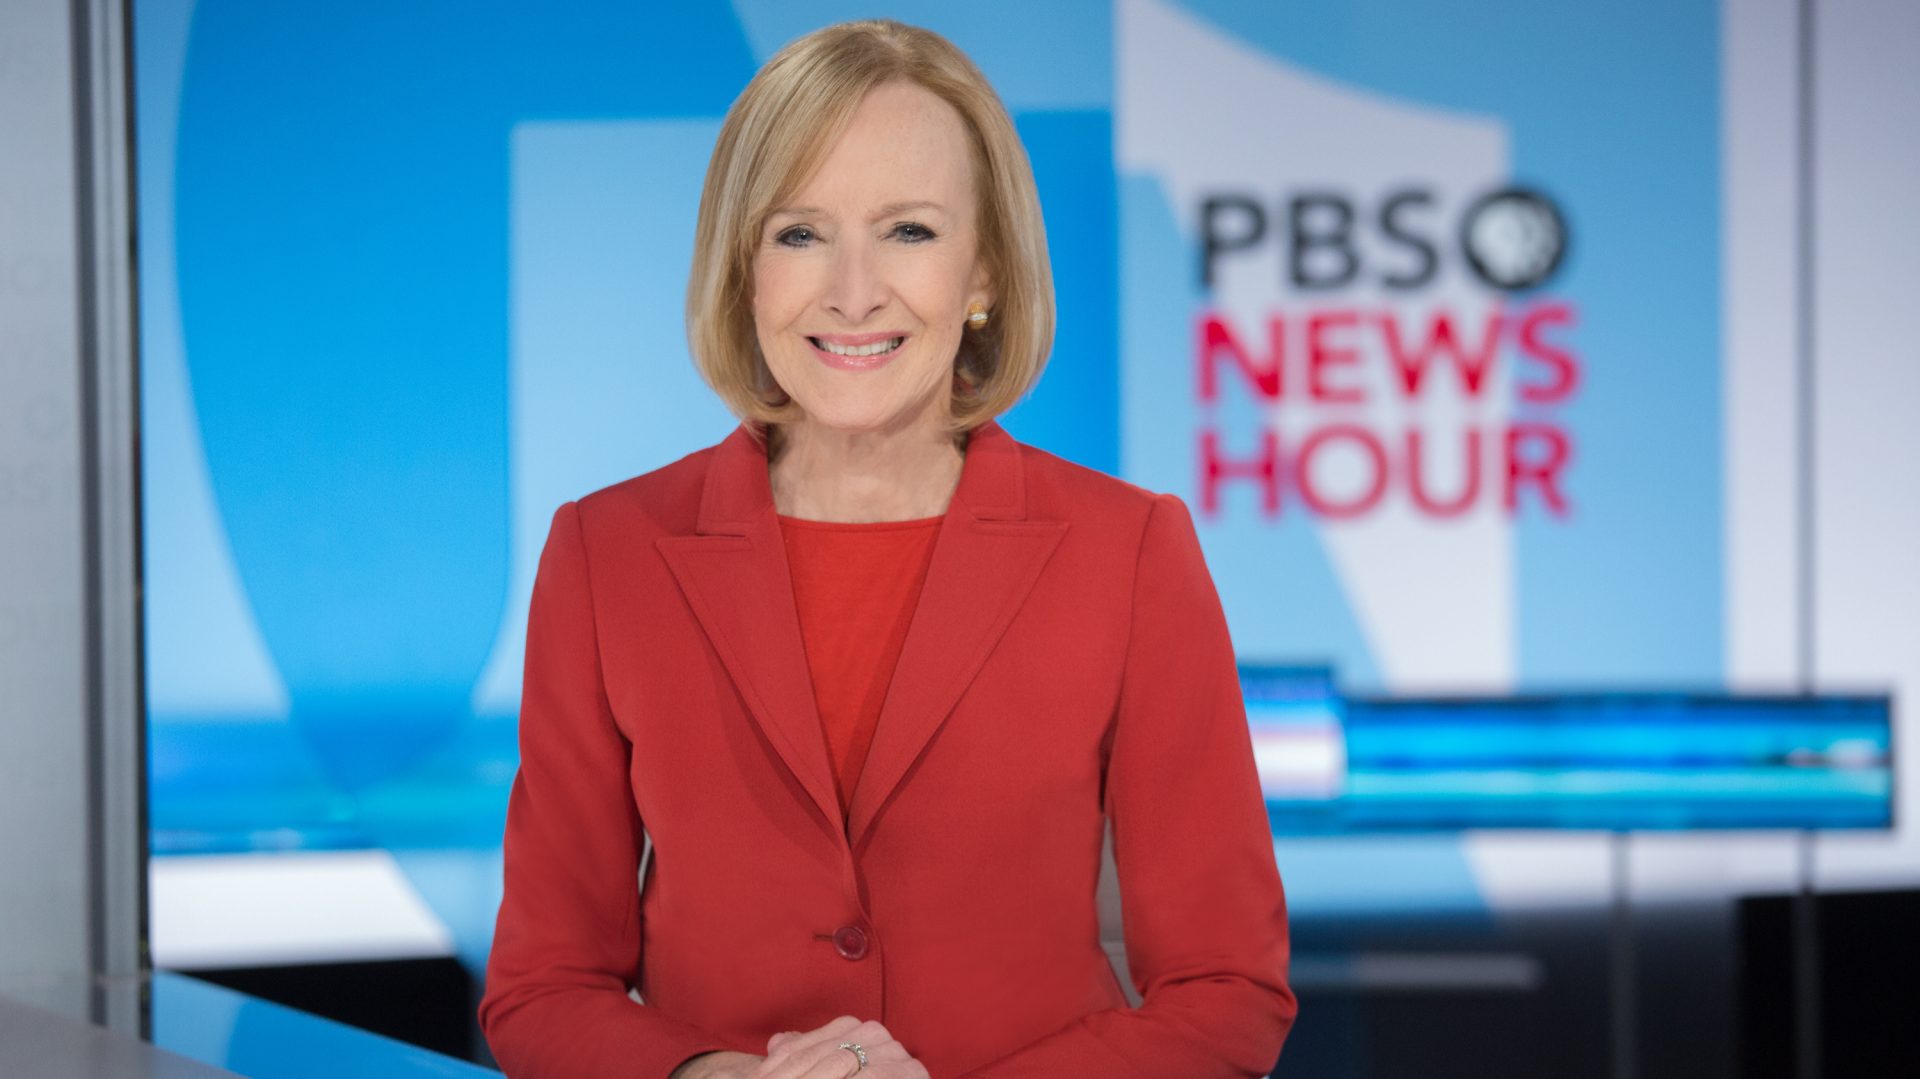 Open VISIONS Forum & the Bank of America Women and Leadership Series – Judy Woodruff, “Ethical Challenges for Journalism: Democracy at a Crossroad”